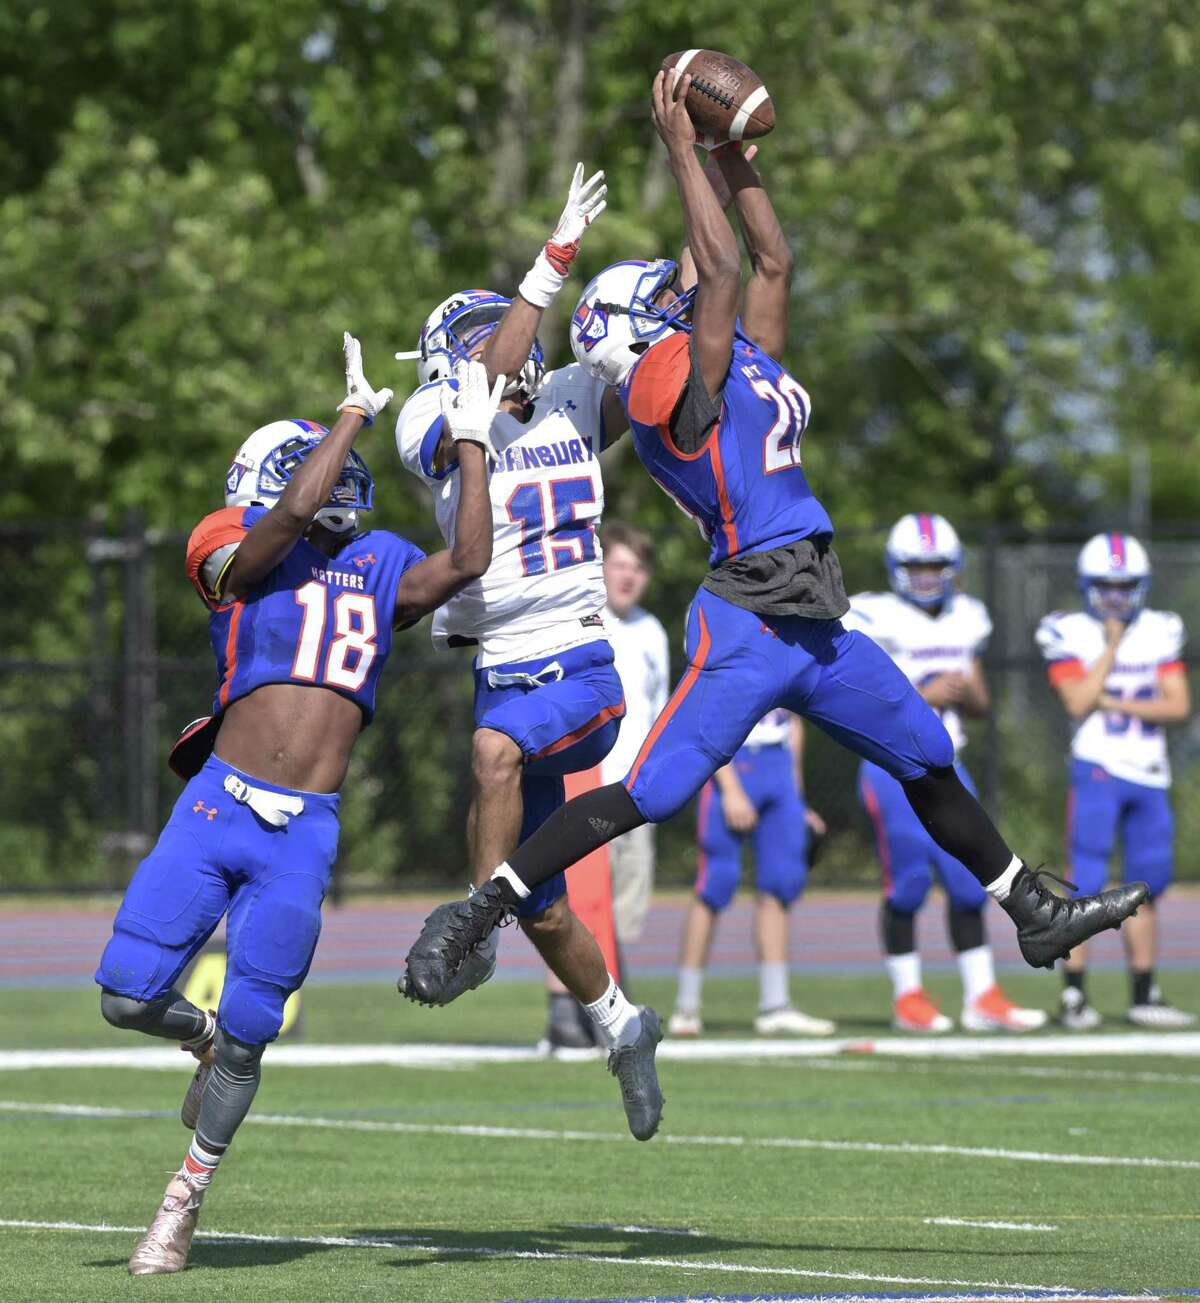 Sylvanus Thompson (20) intercepts a pass intended for Bernie DeLacruz (15), with Ronell Hopkins (18) in on the play, in the annual spring Blue-White Scrimmage of the Danbury High School football team, Friday, June 15, 2018, at Danbury High School, Danbury, Conn.